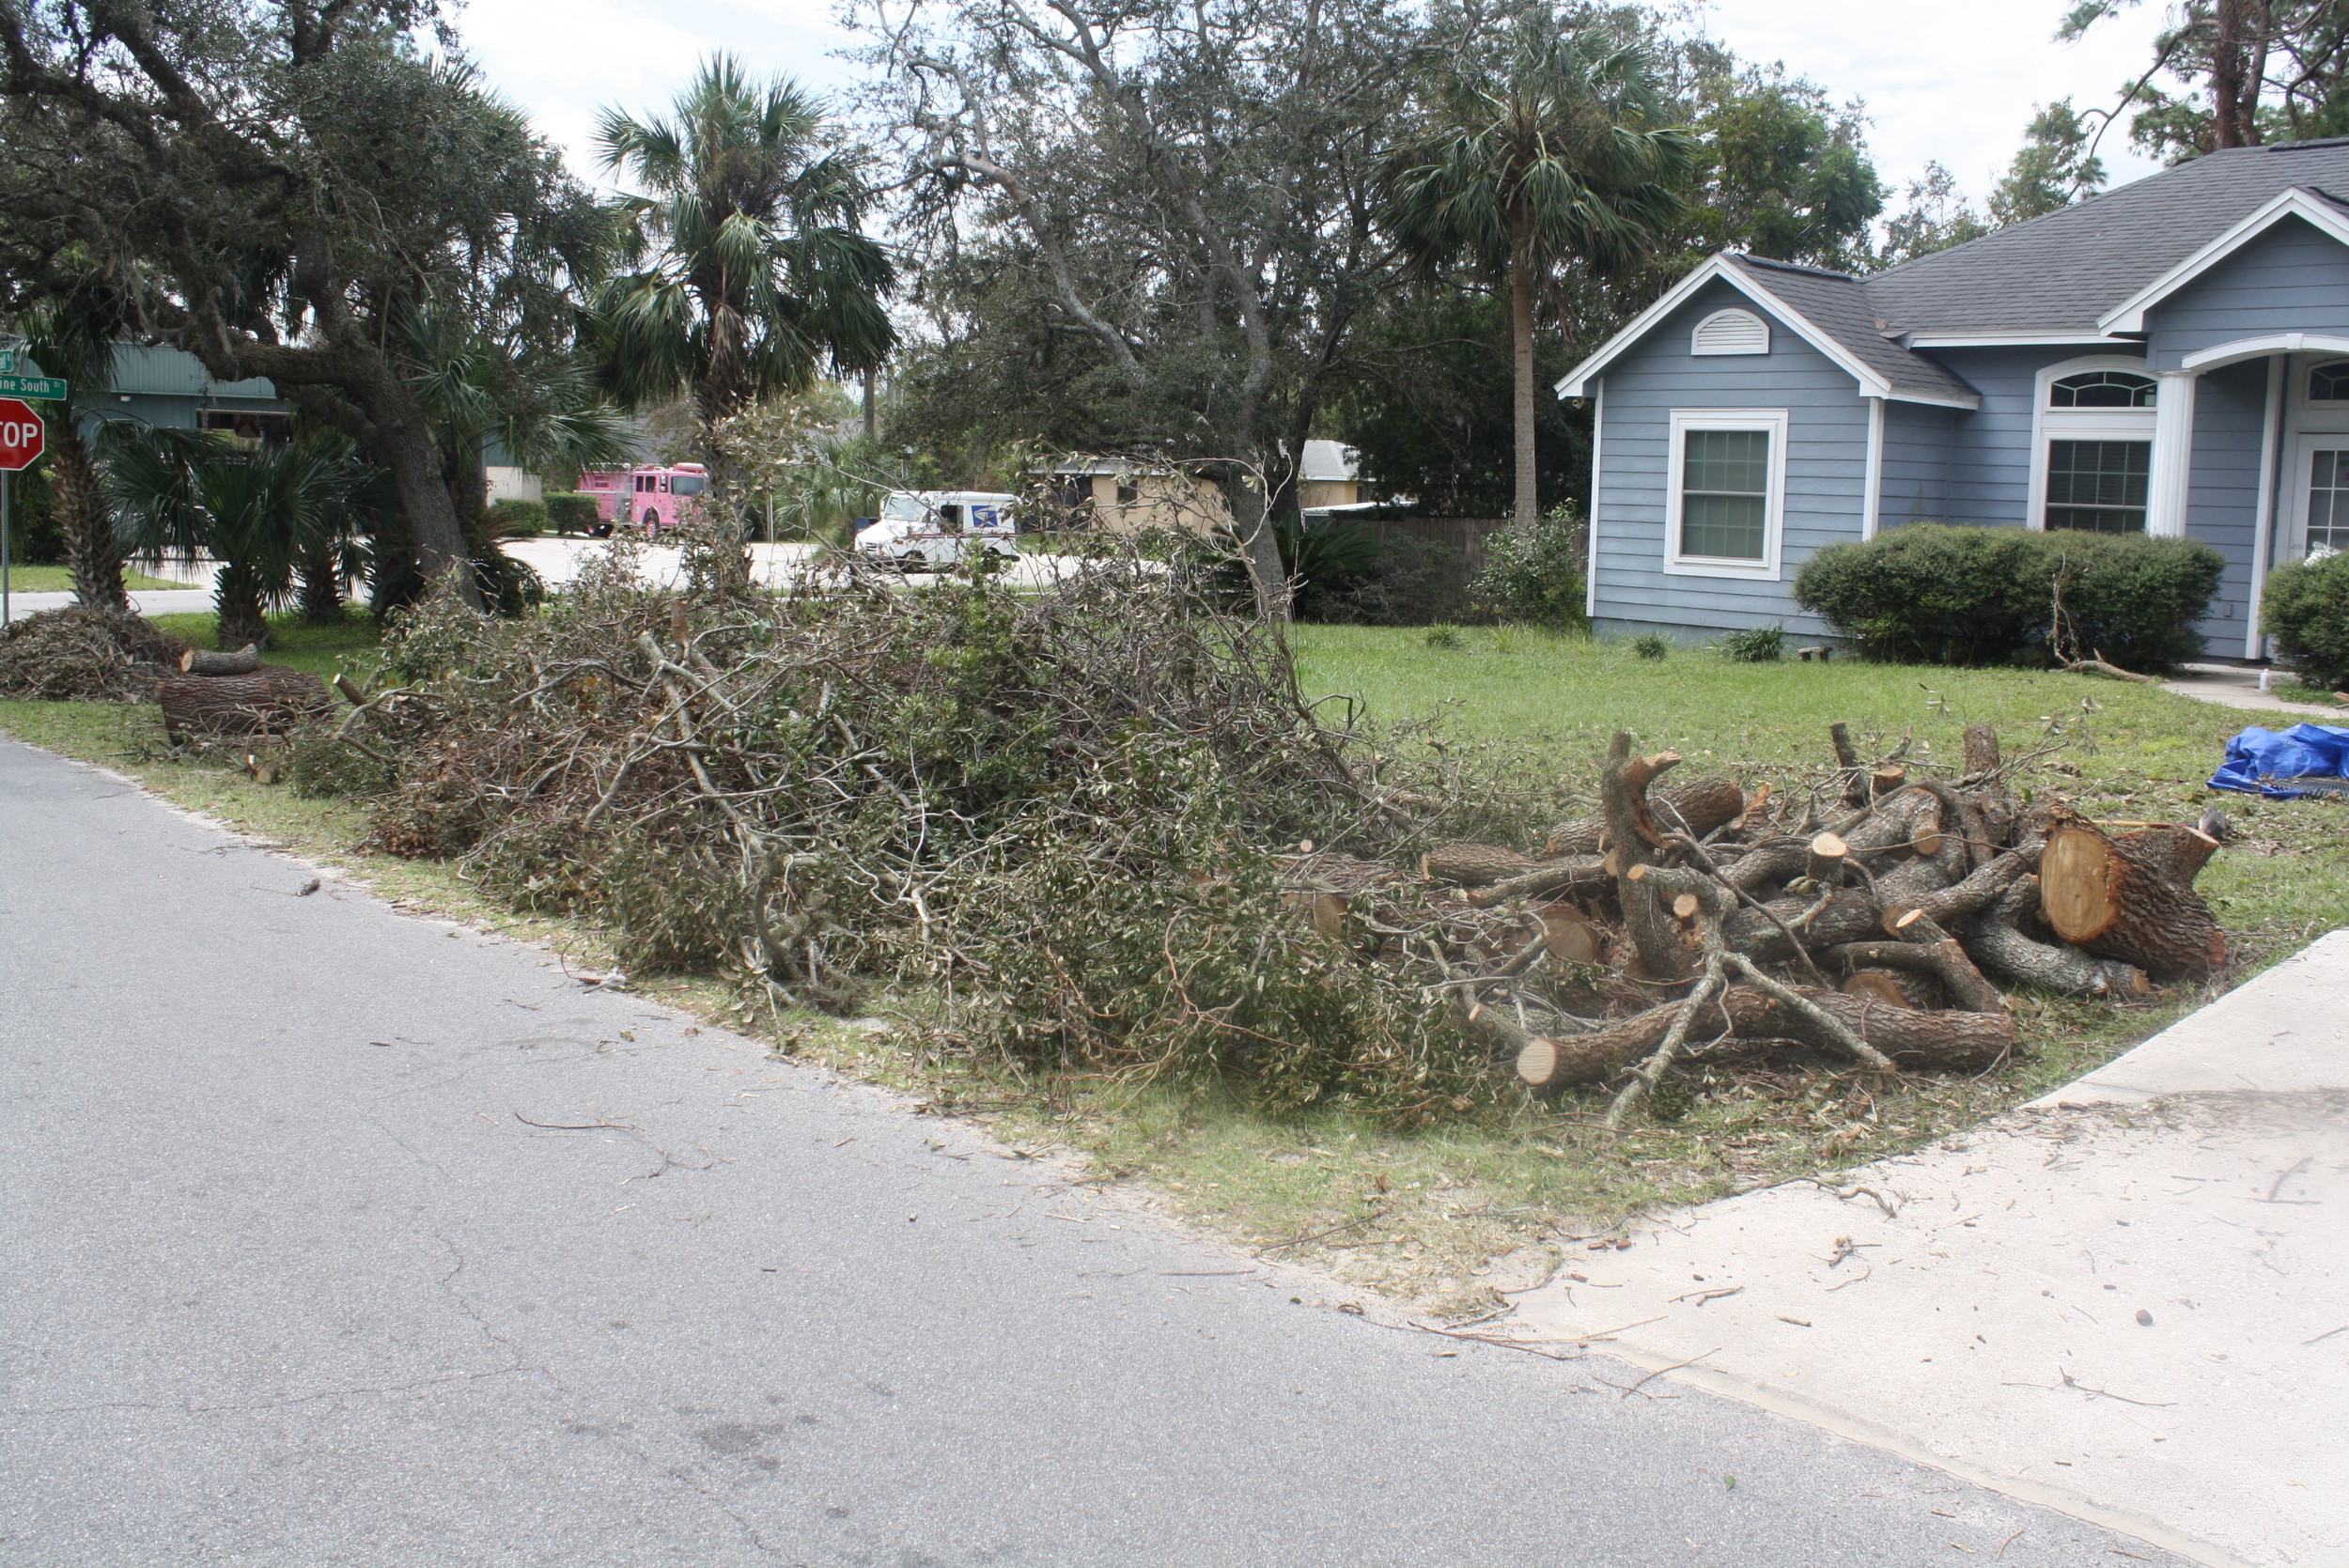 Storm debris from Hurricane Irma lines a resident’s yard in St. Augustine.